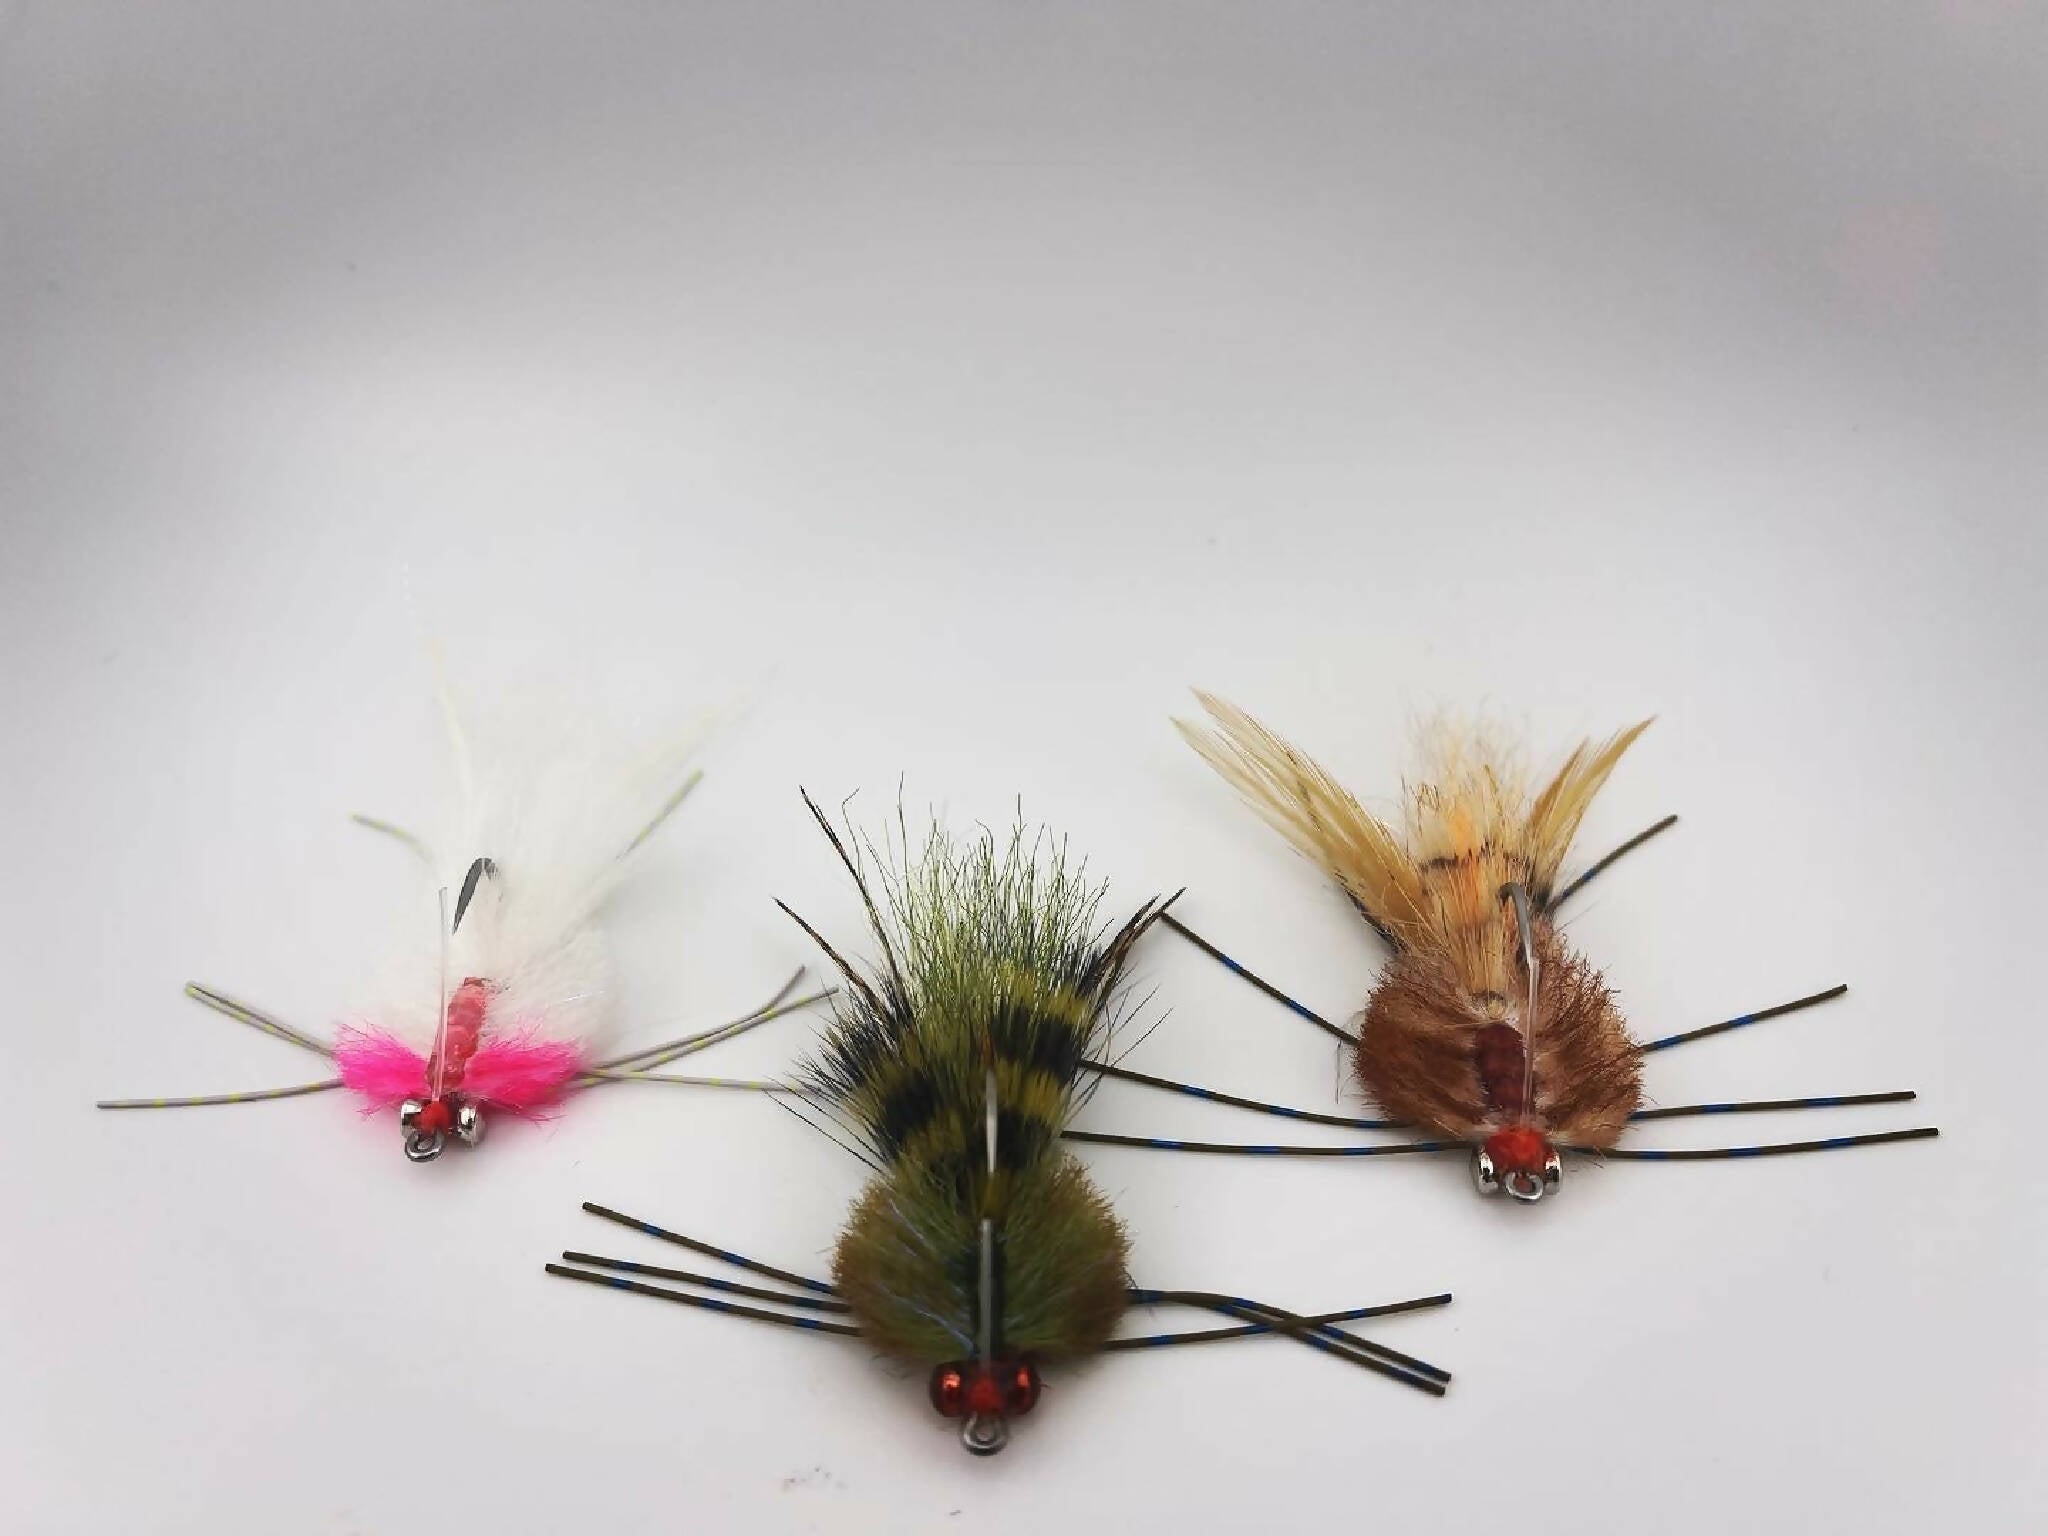 ACO Custom Saltwater Fly Boxes (15 flies) – Check Your Flies